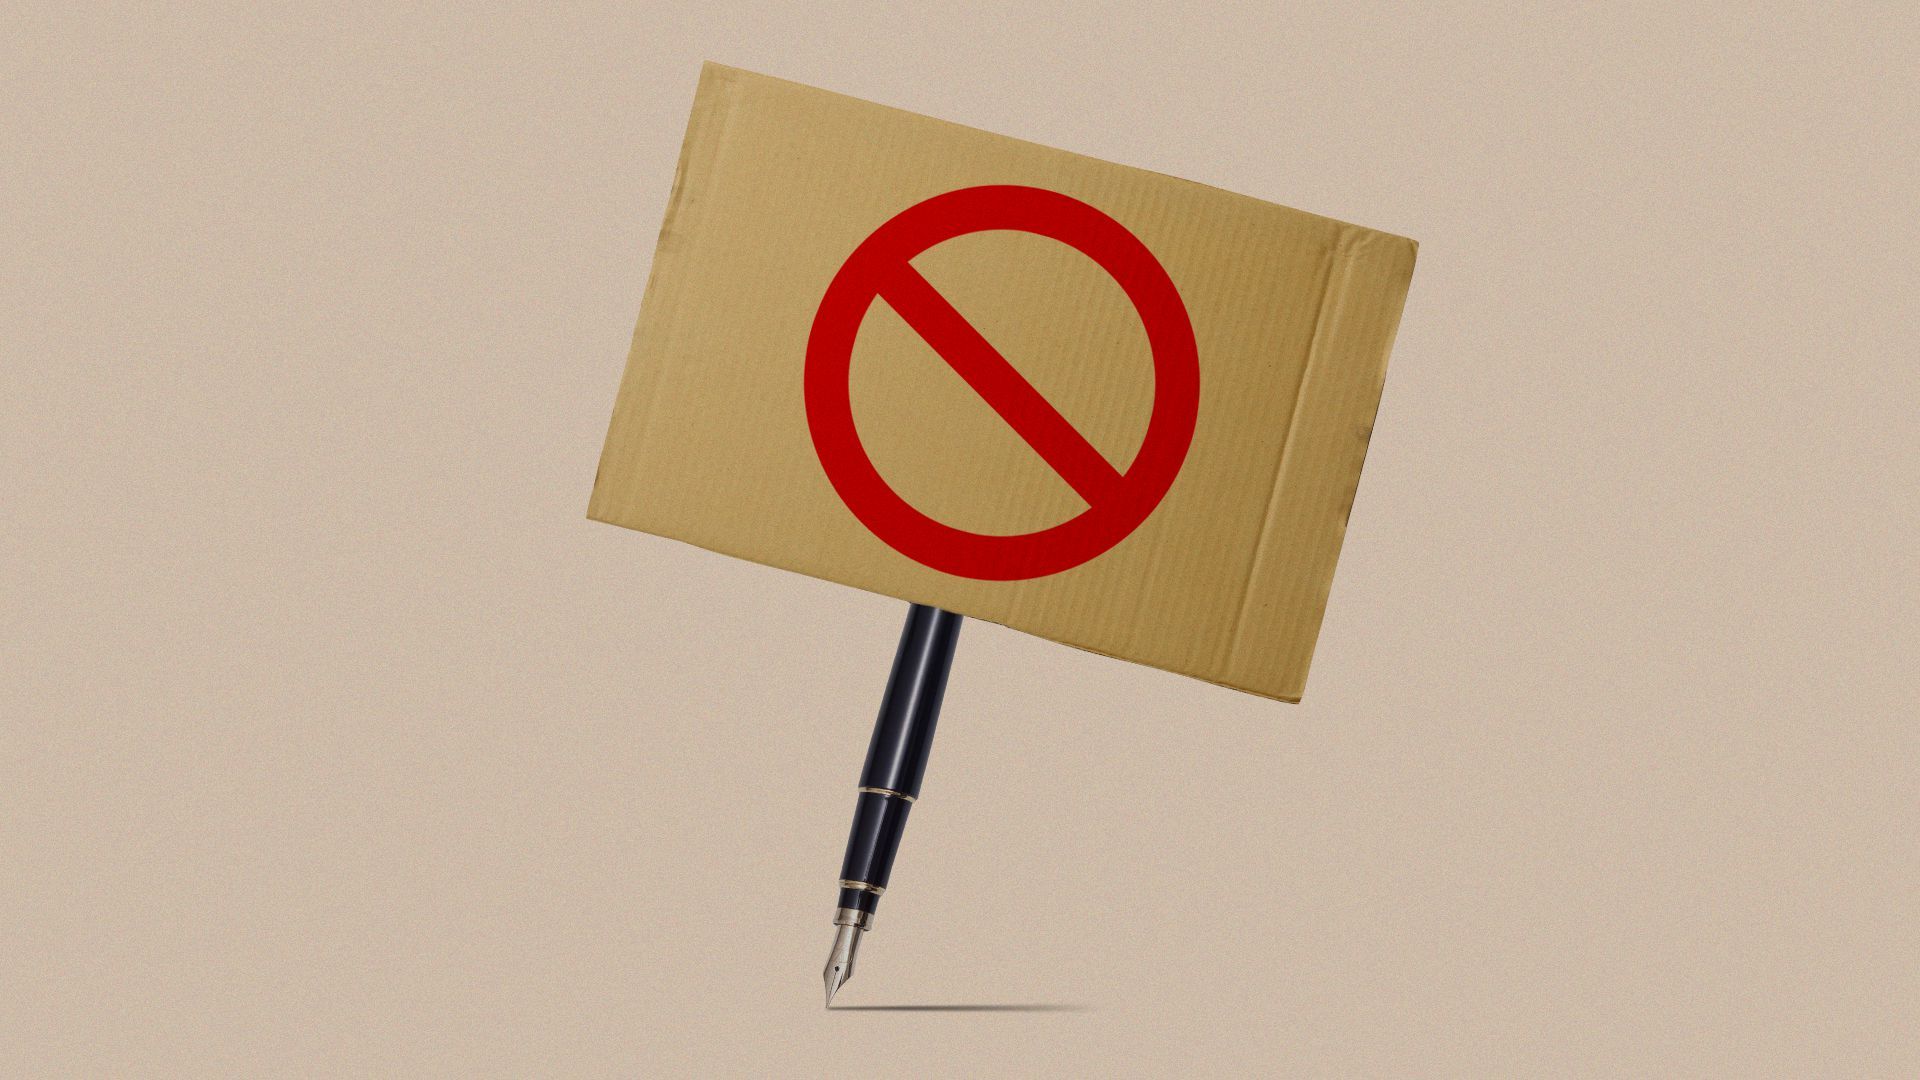 Illustration of a picket sign with a pen for a handle and a "No" symbol painted on it.